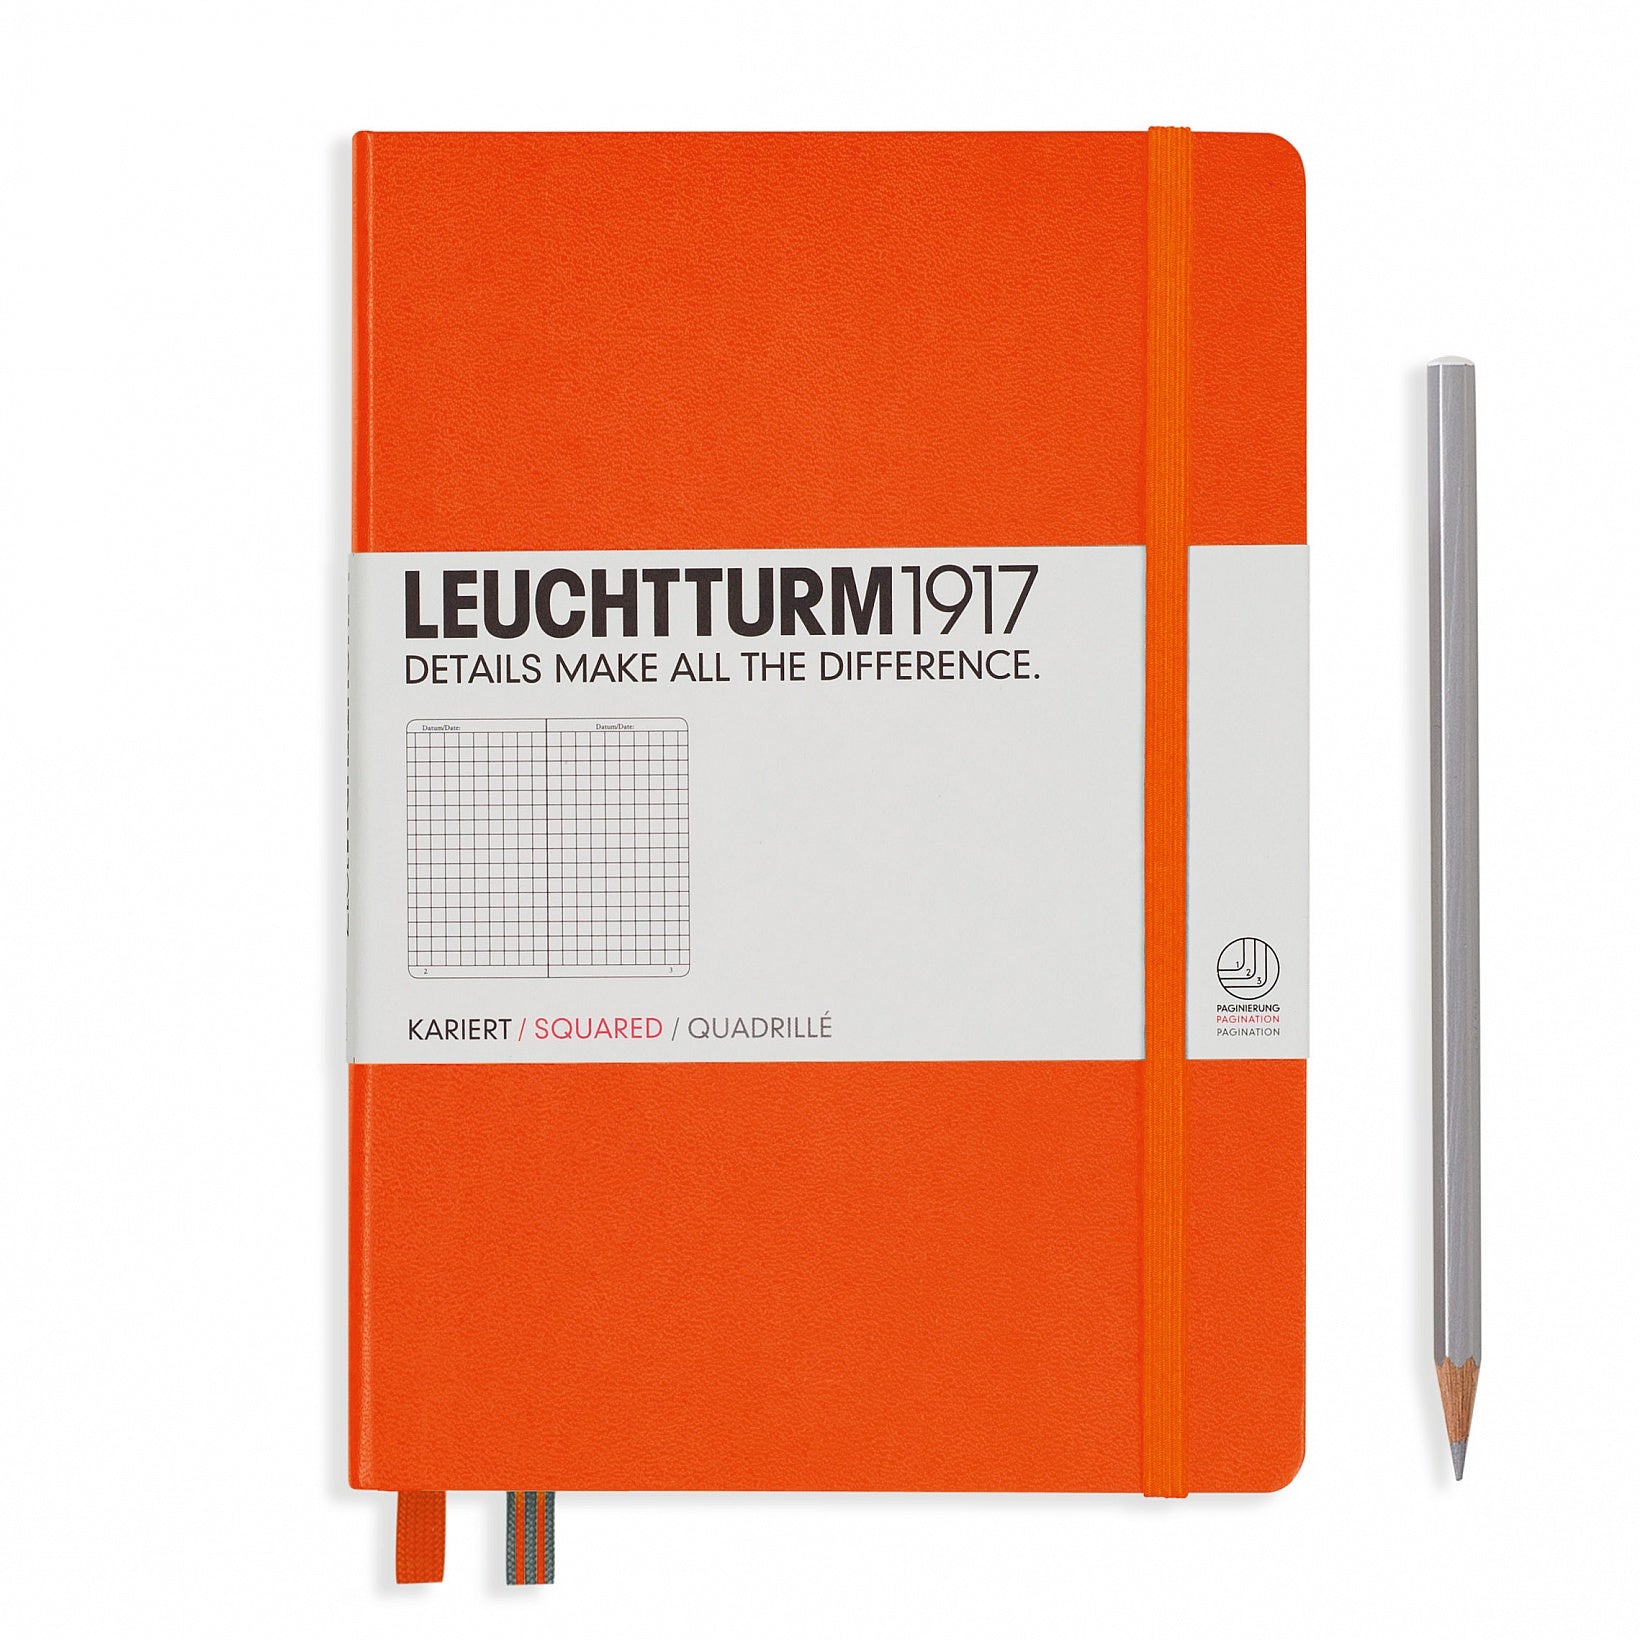 LEUCHTTURM1917 - Medium A5 Plain / Ruled / Squared / Dotted Hardcover  Notebook , Comes with Stickers for Labeling and Archiving - AliExpress